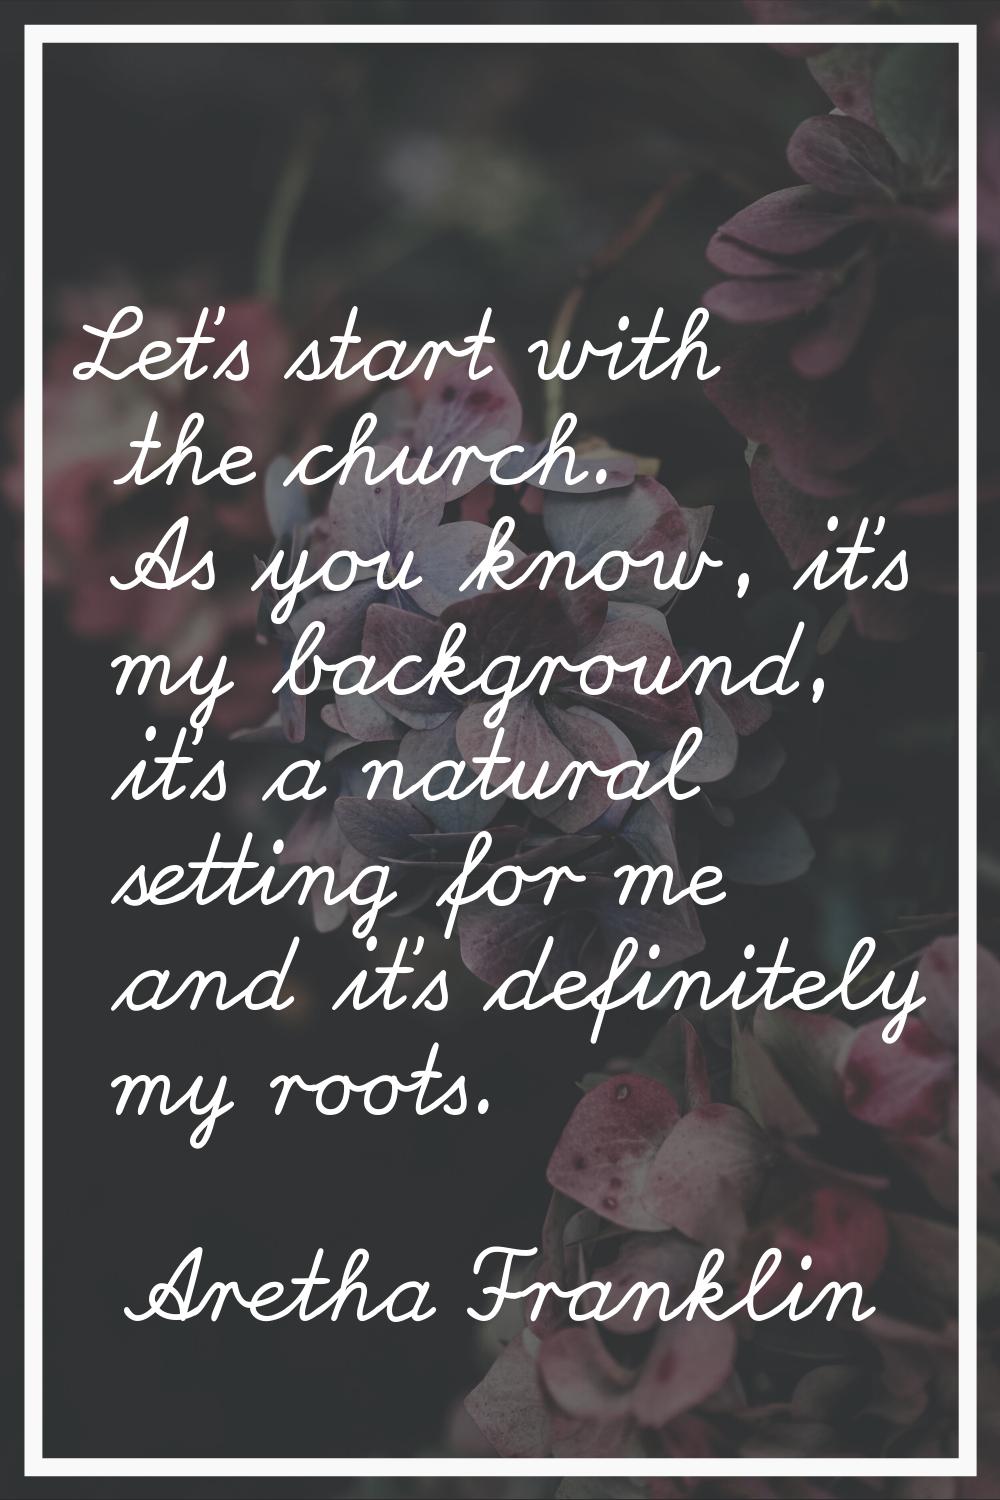 Let's start with the church. As you know, it's my background, it's a natural setting for me and it'